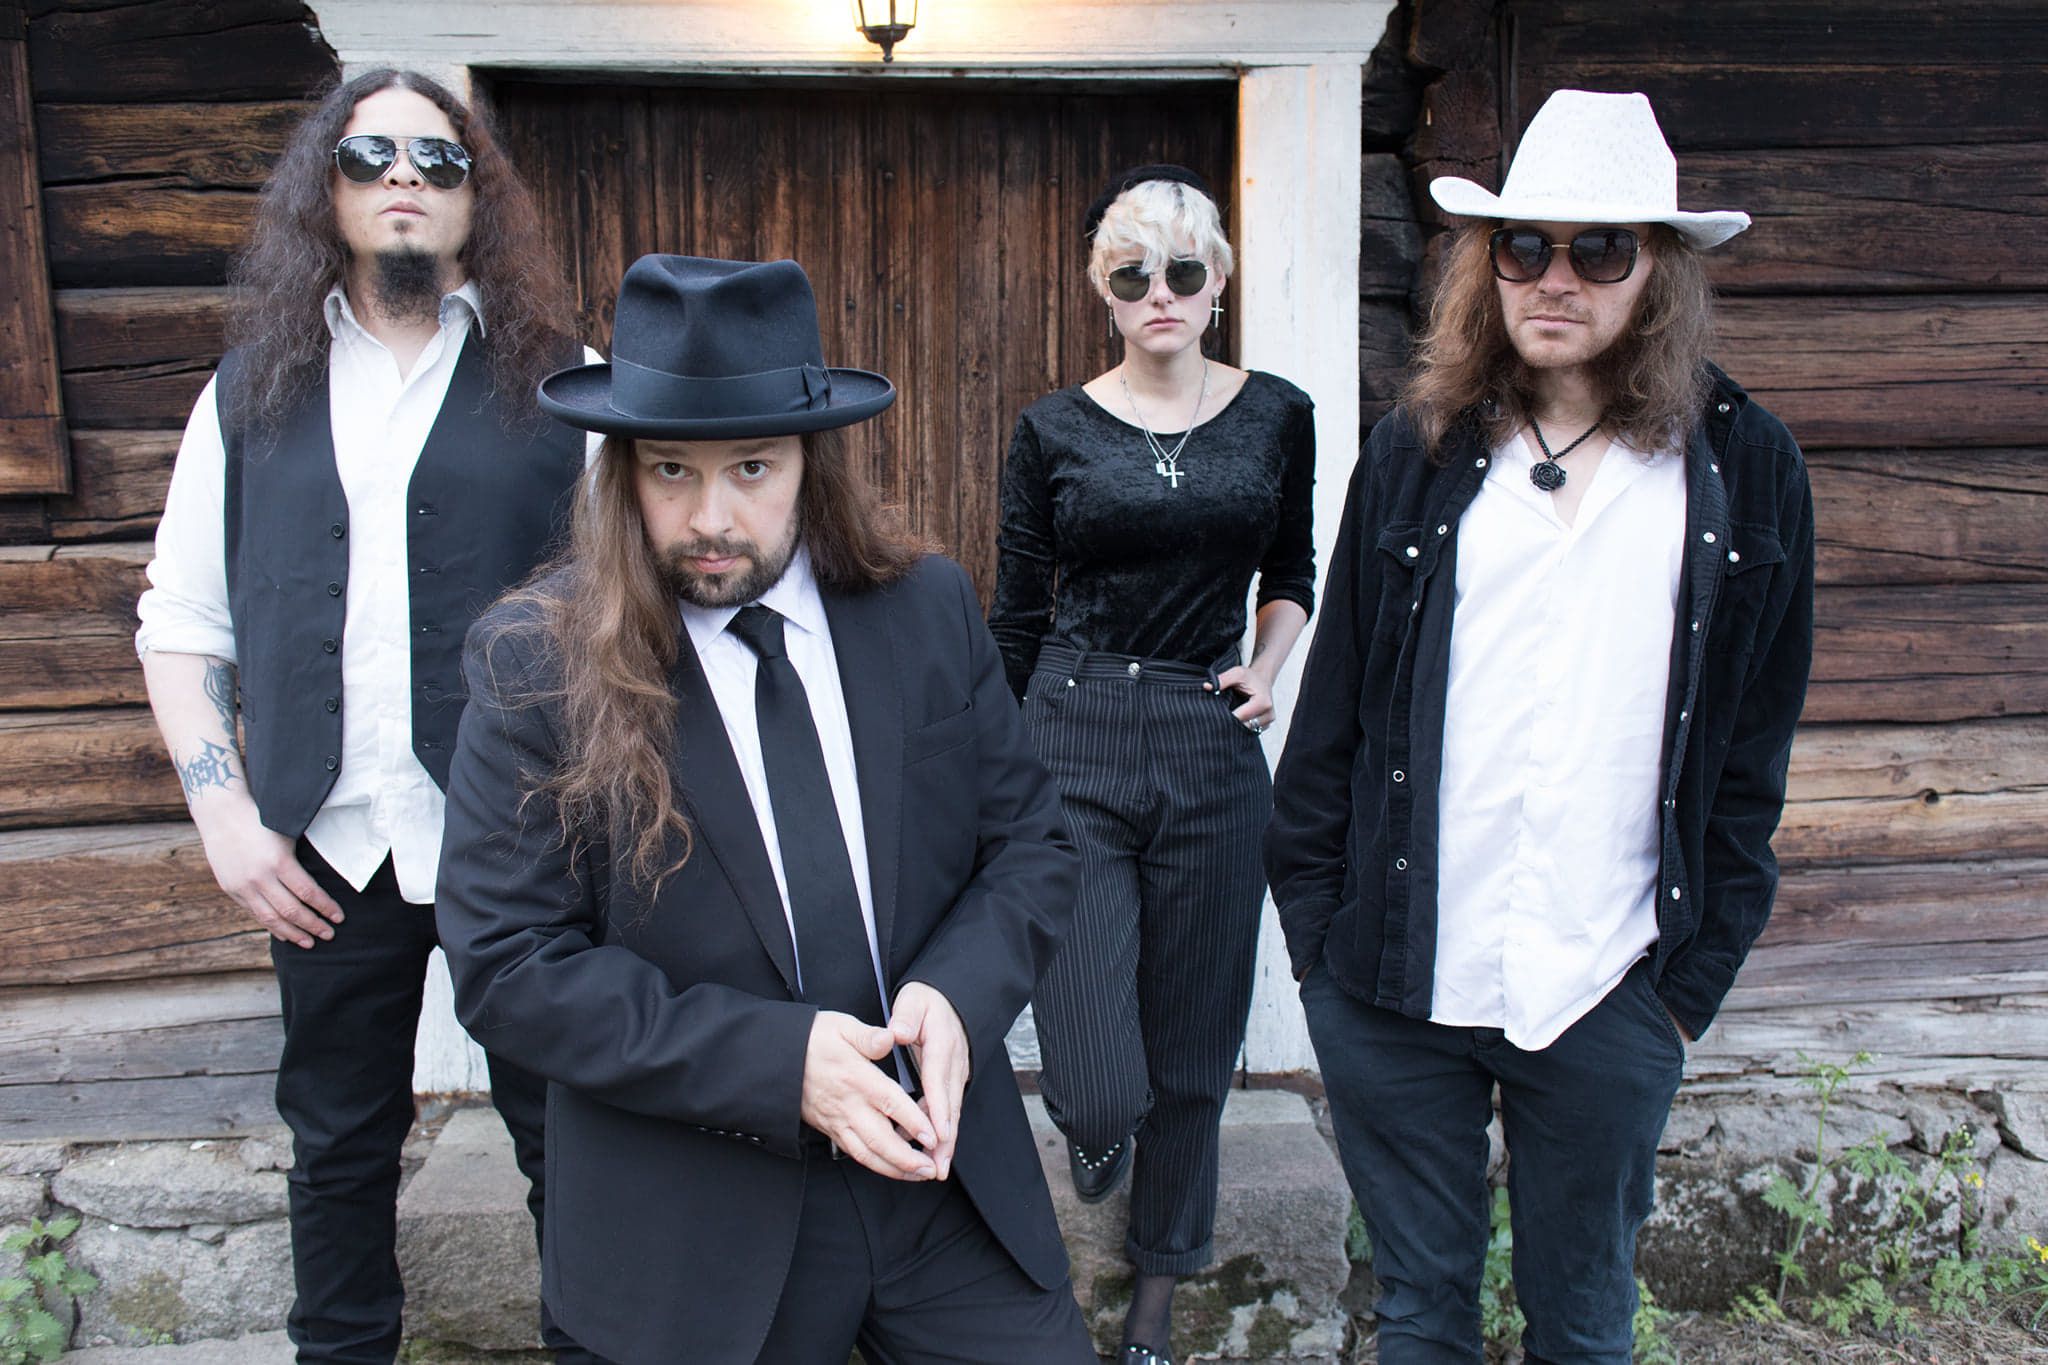 Ole Devil & the Spirit Chasers – song premiere